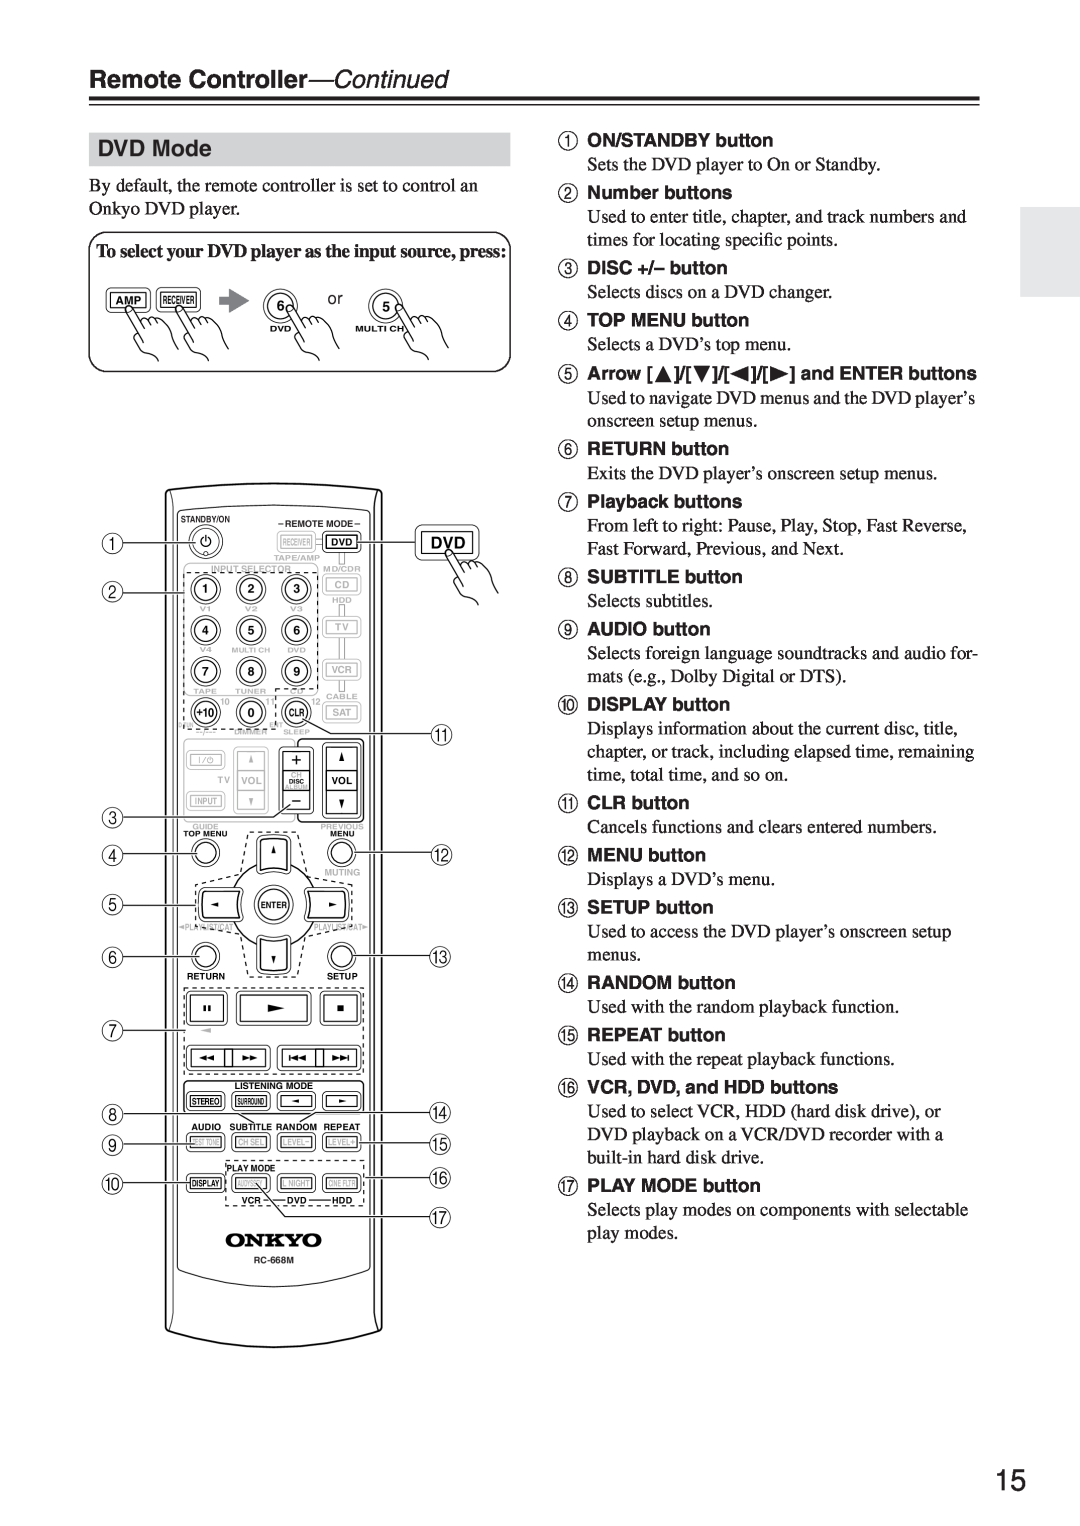 Onkyo HT-R640 DVD Mode, Remote Controller-Continued, To select your DVD player as the input source, press 